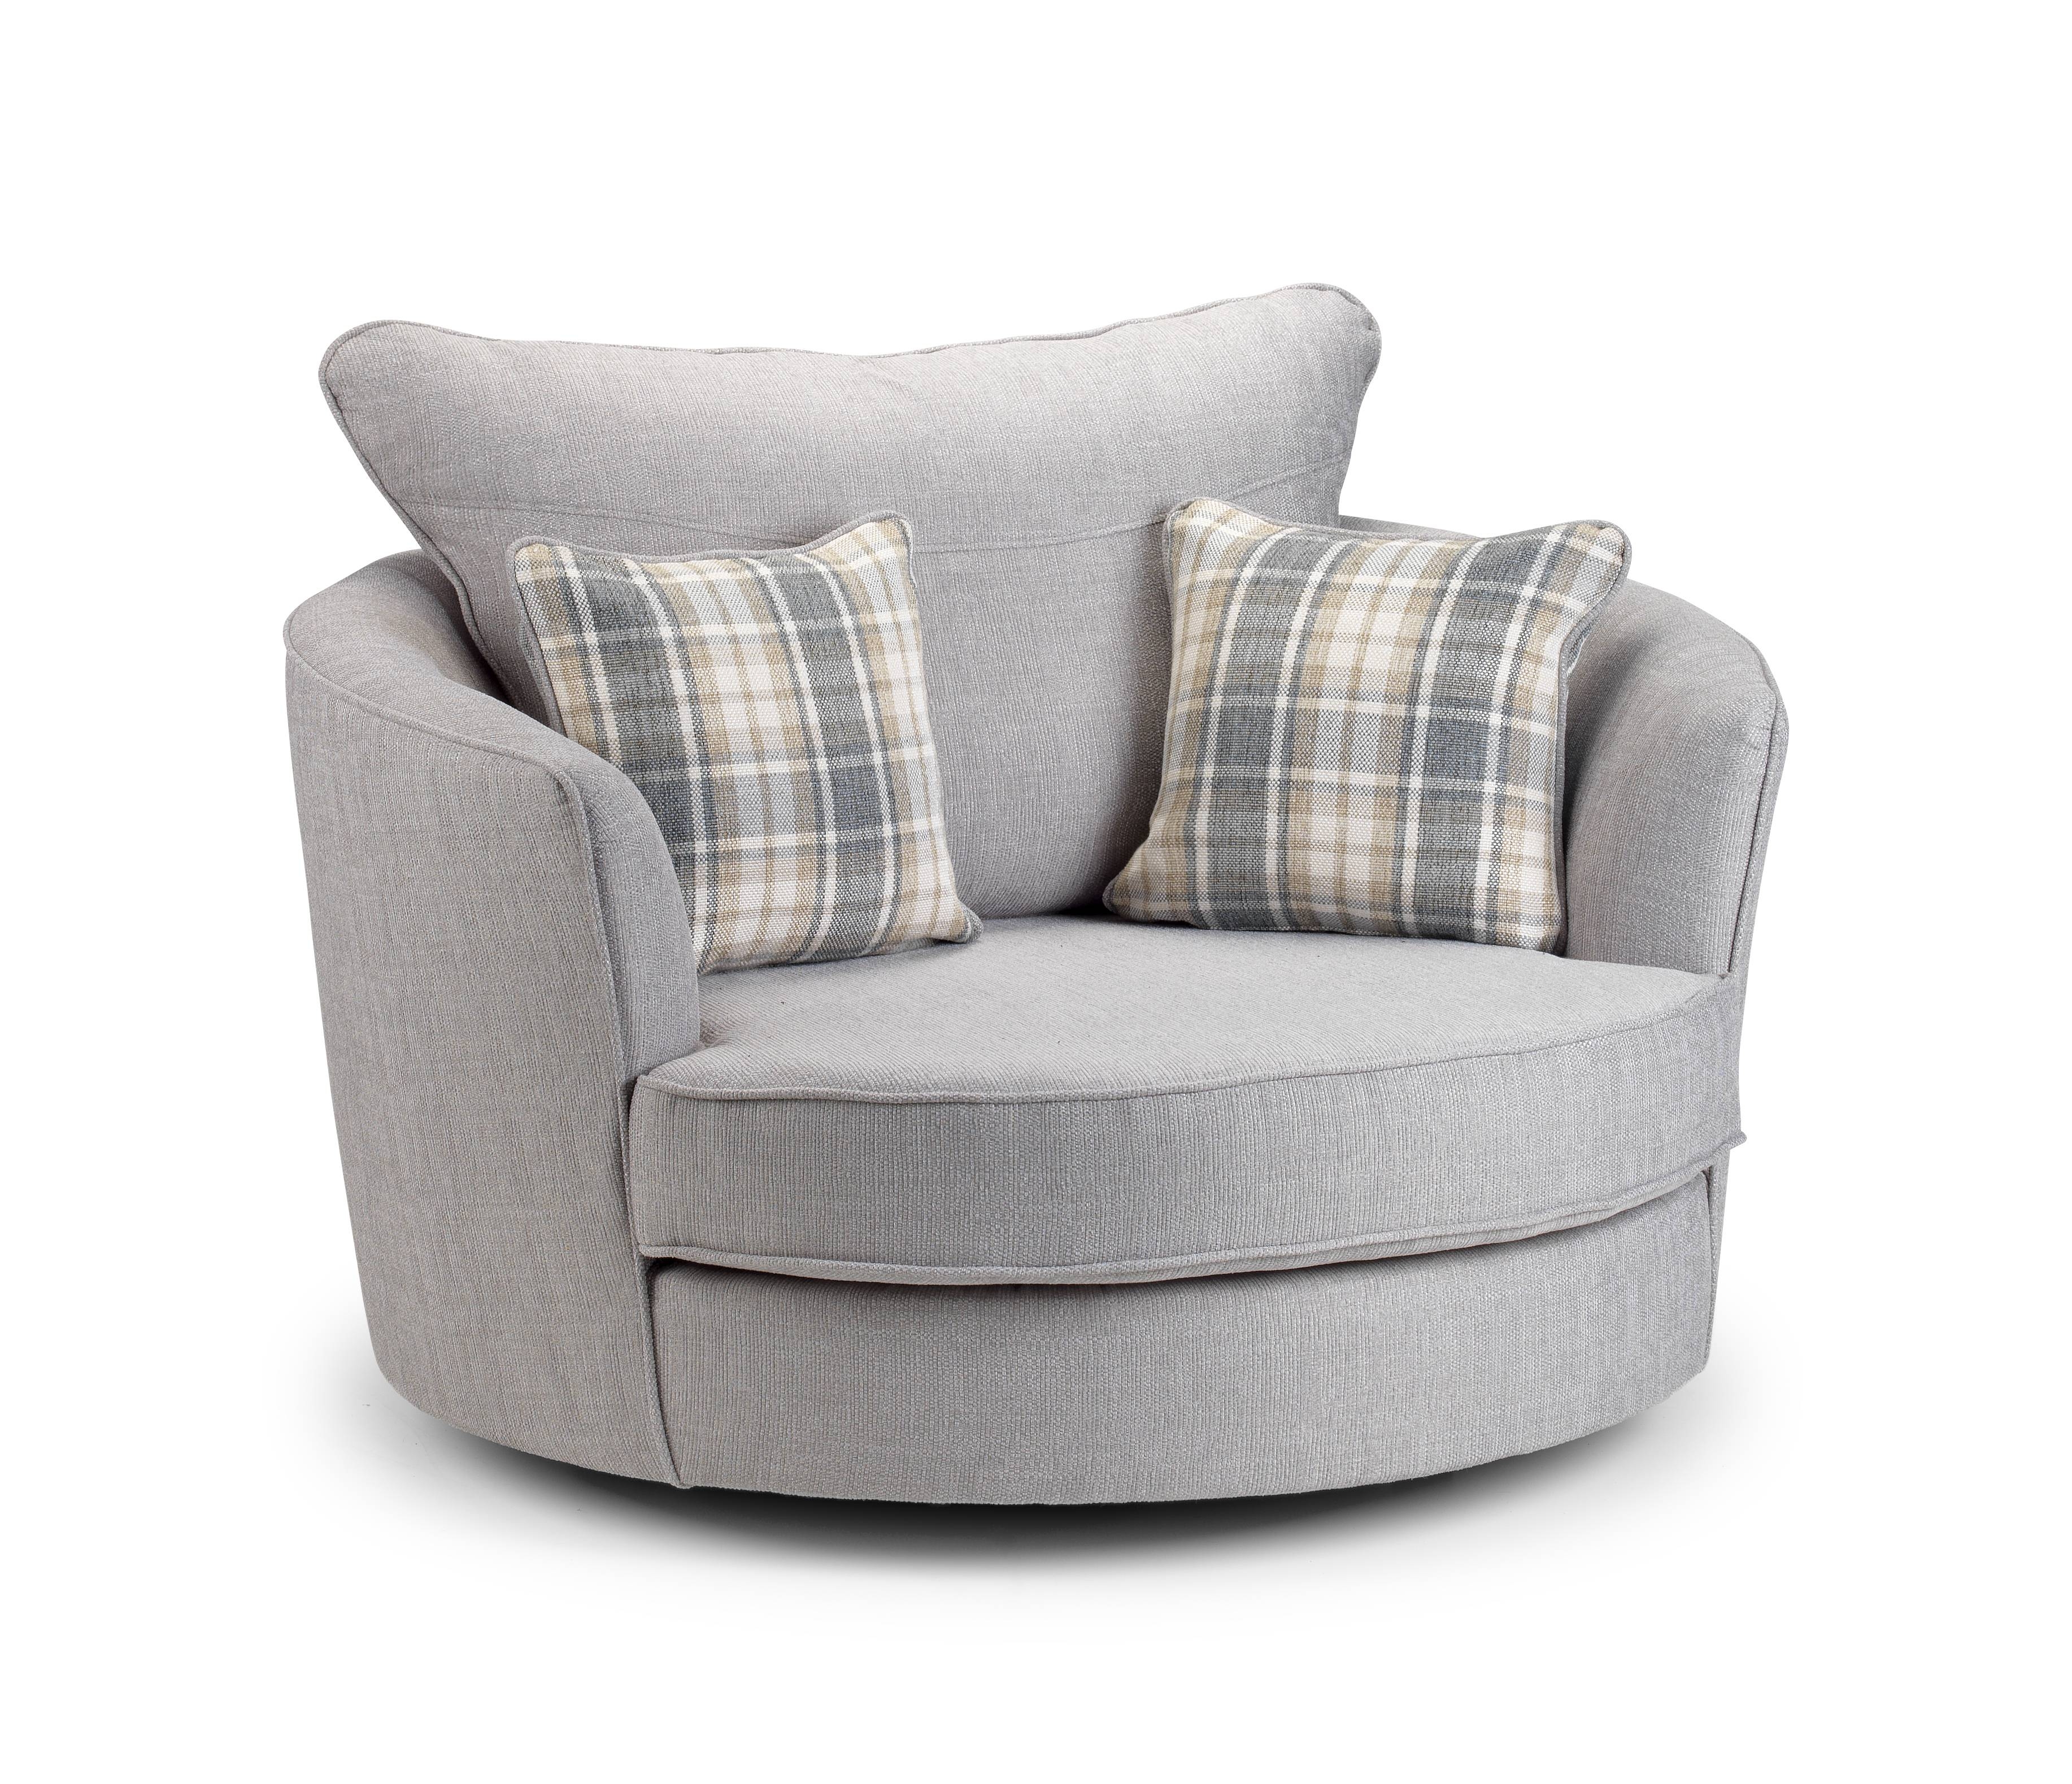 round sofa chair in relation to swivel chairs OVFGEZD